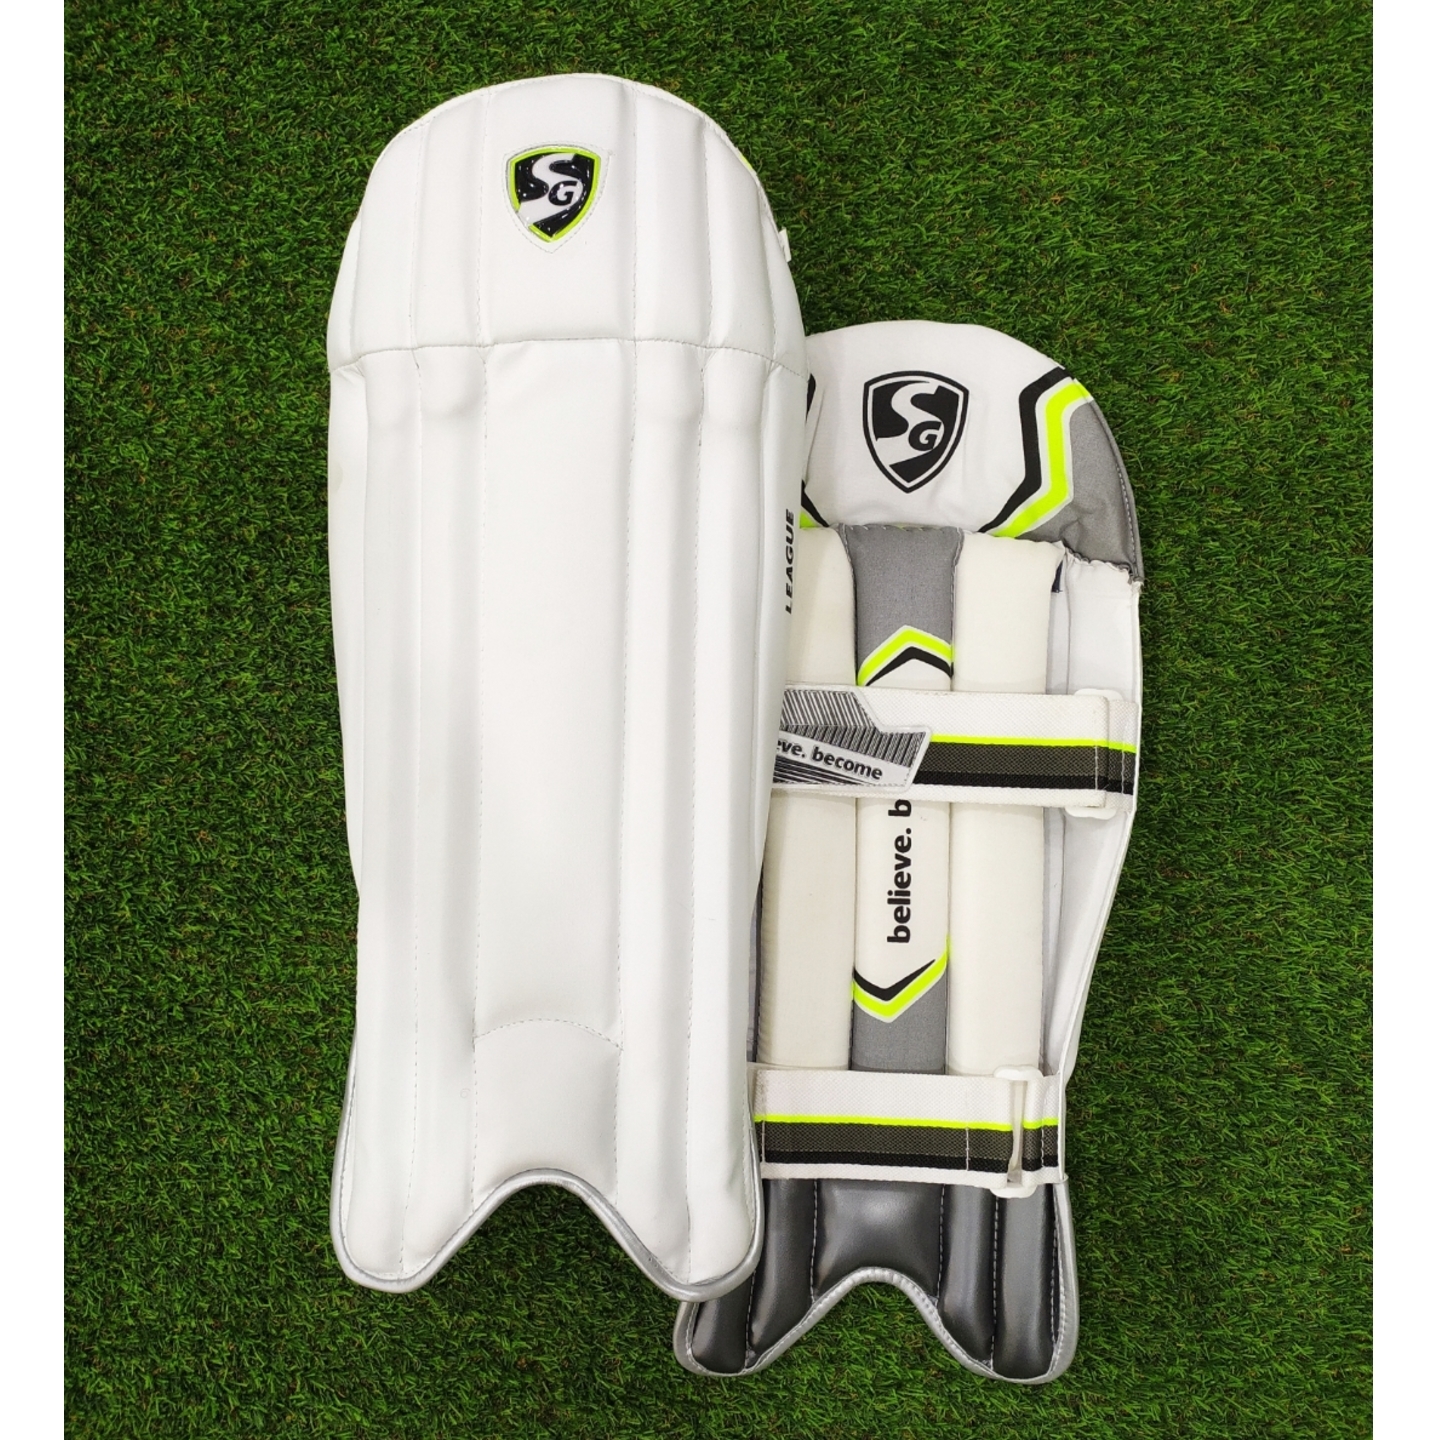 SG LEAGUE WICKET KEEPING PAD